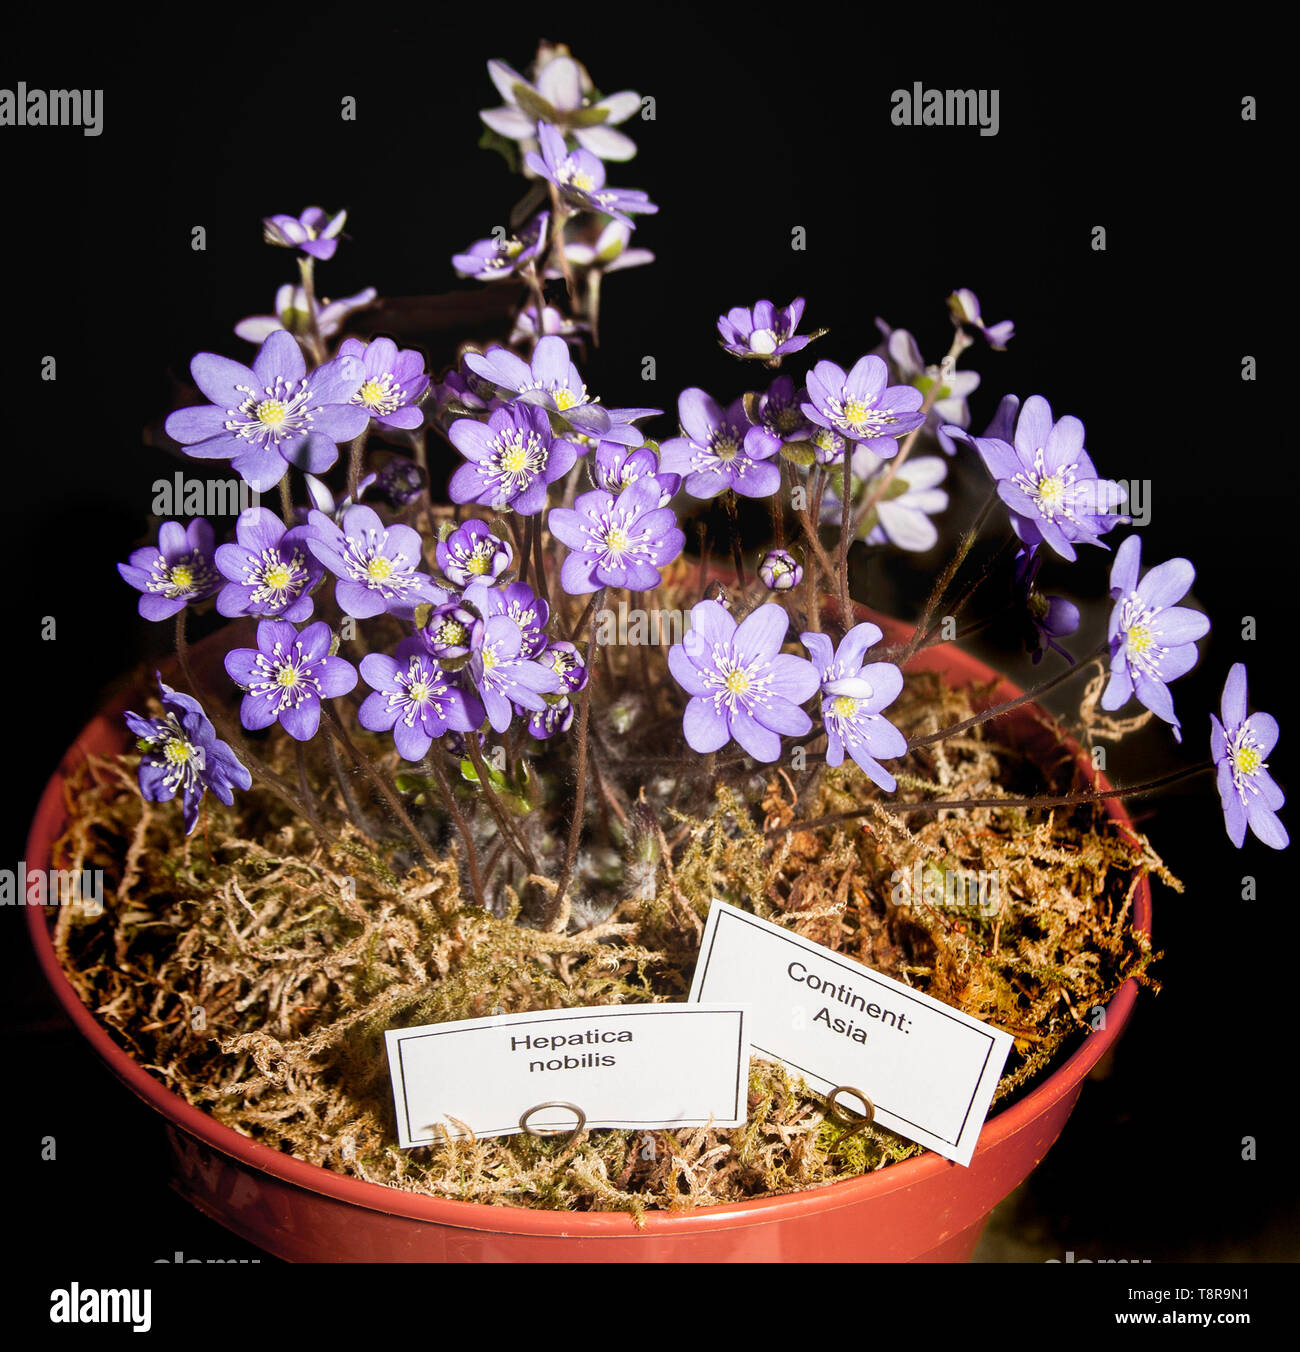 Hepatica nobilis a hardy alpine plant suitable for rockeries grown as a container plant for show in bloom in March. Stock Photo